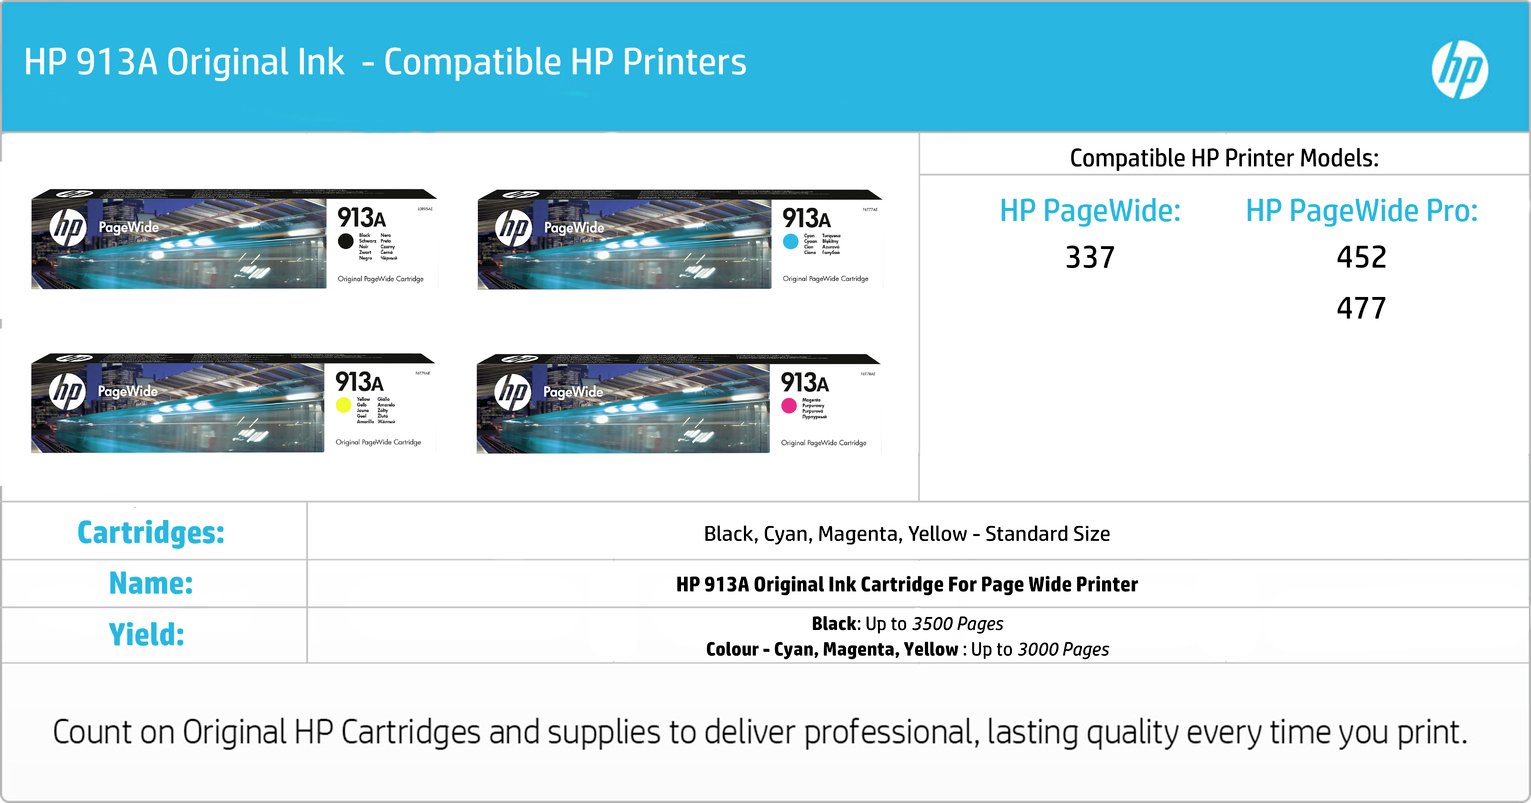 HP 913A PageWide Original Ink Cartridge Review